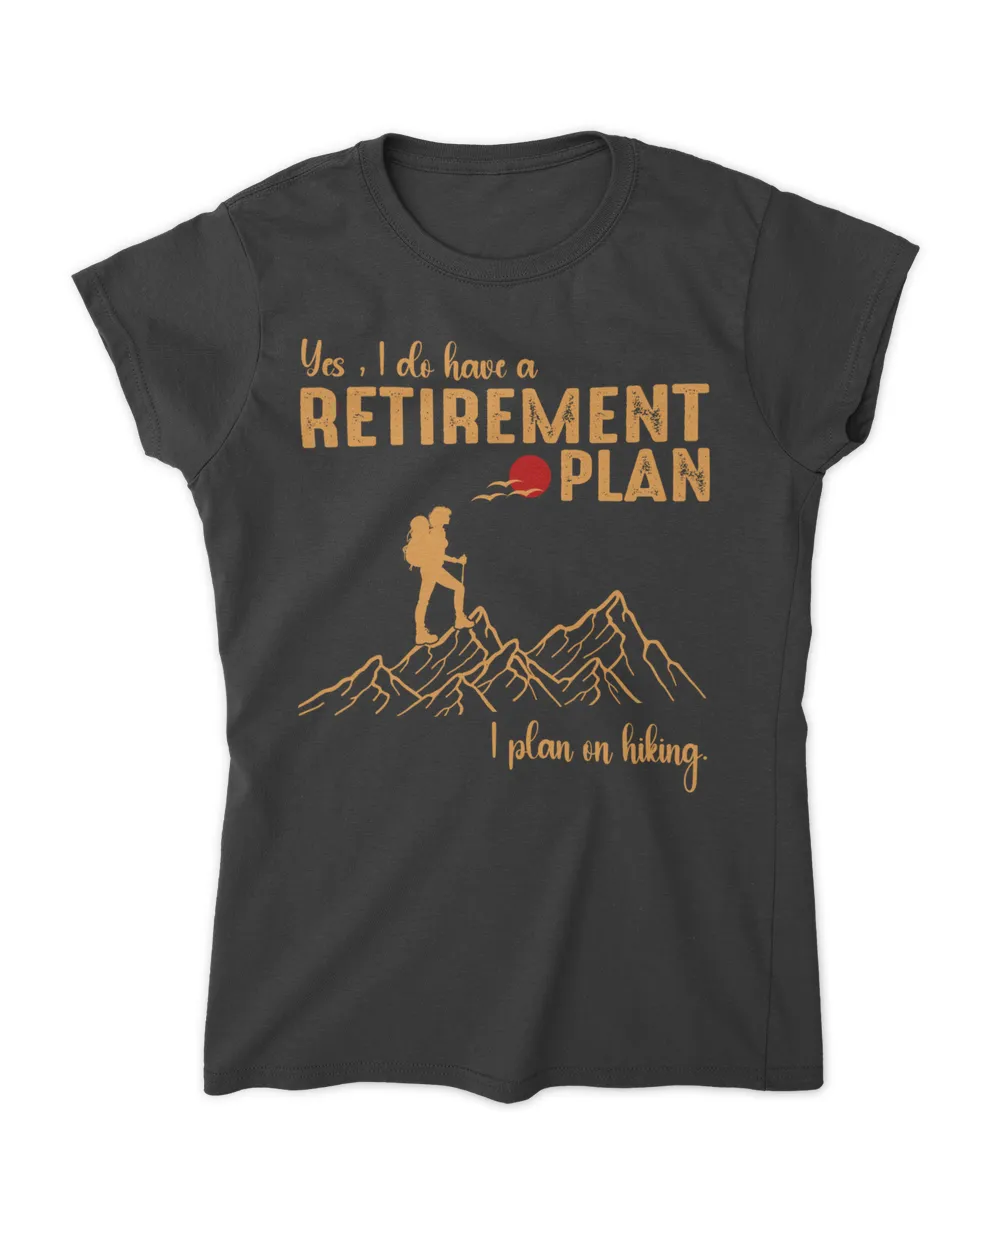 Yes, I do have a Retirement Plan - I plan on hiking Woman t-shirt